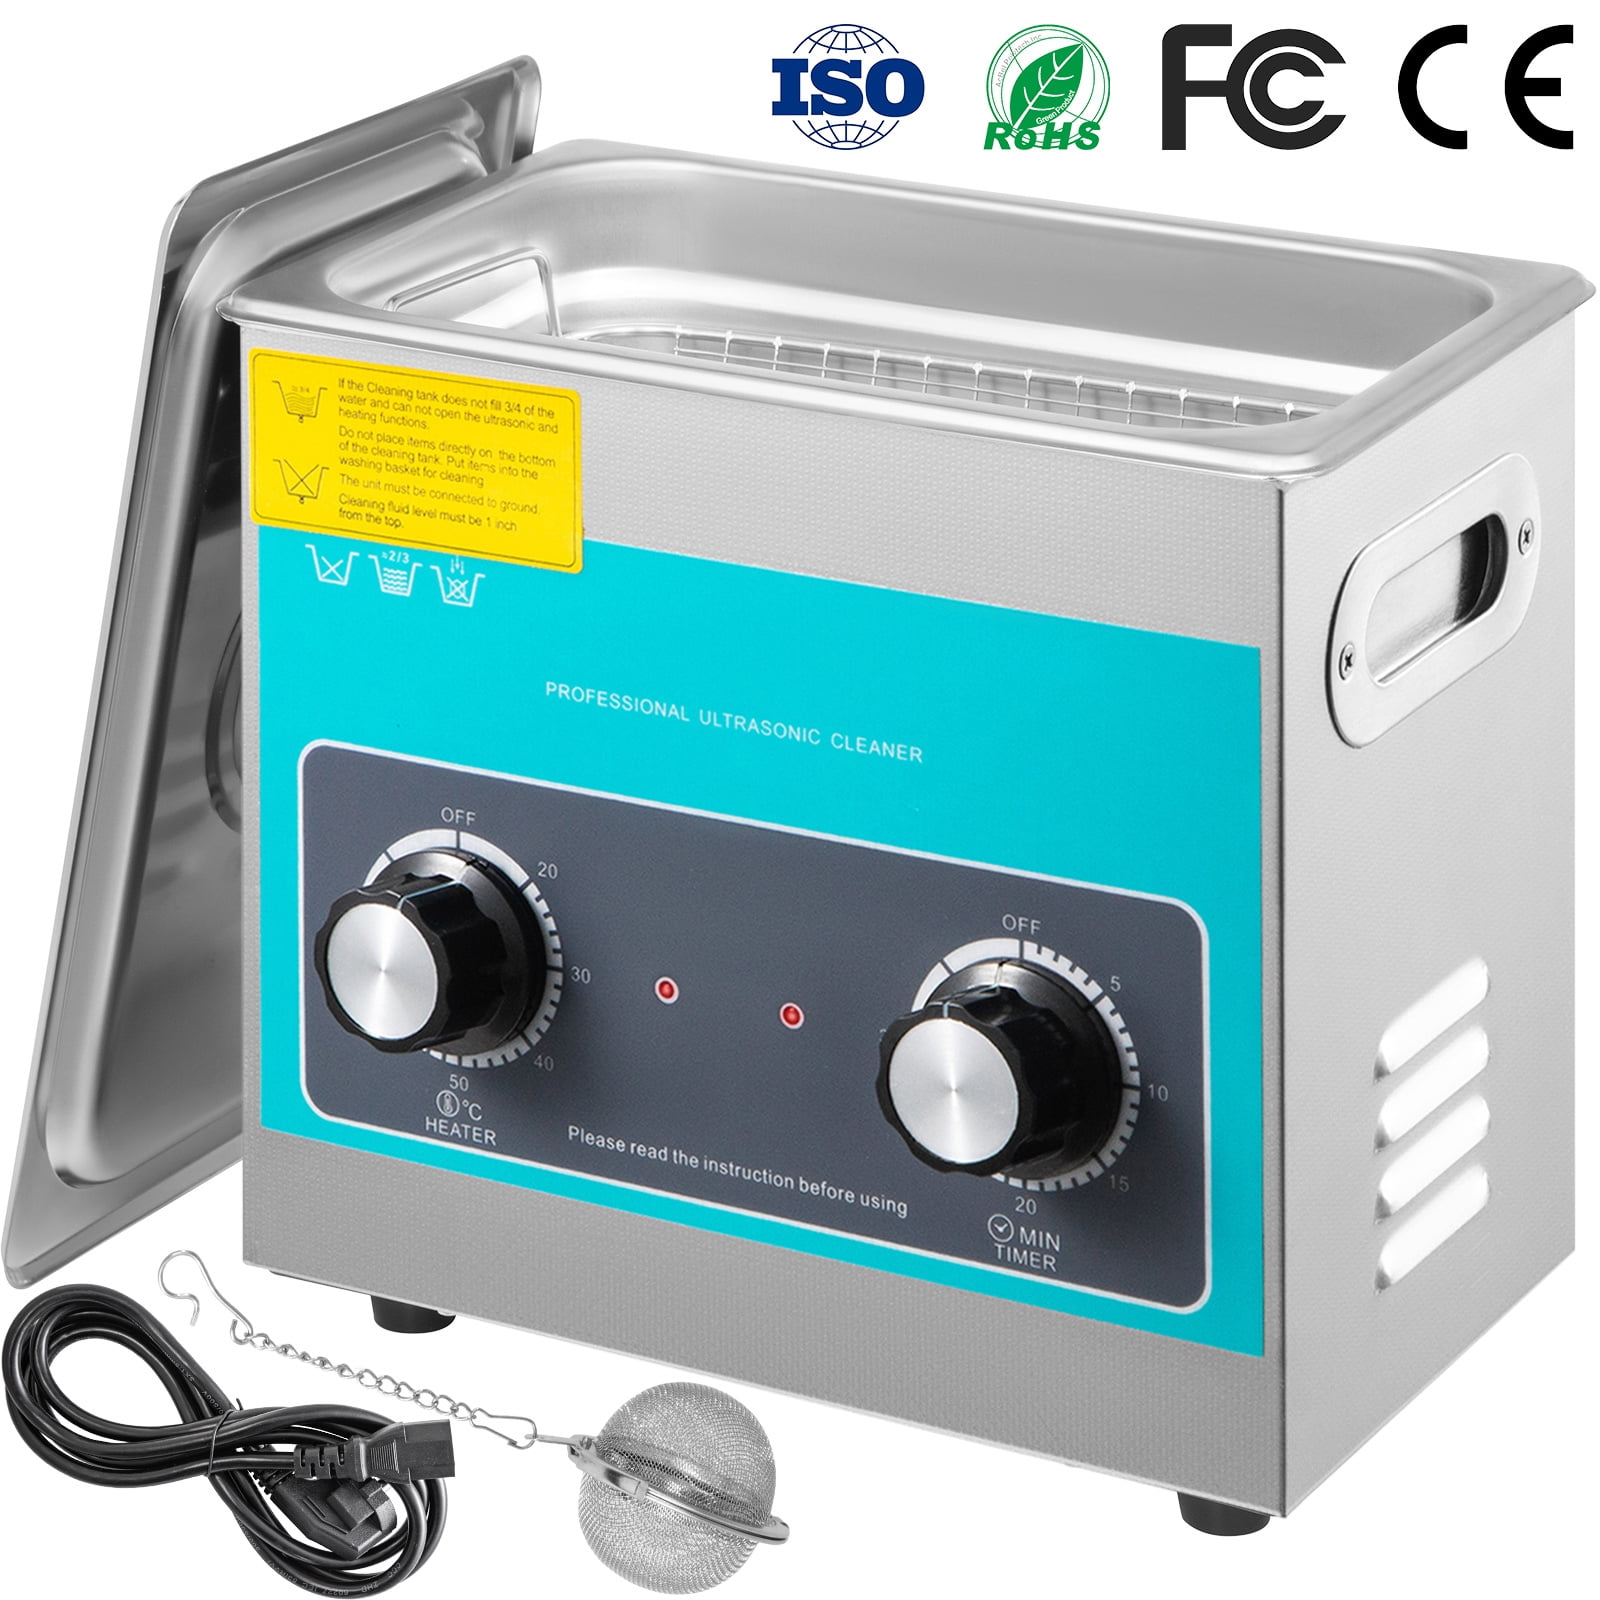 Table Top Commercial Ultrasonic Cleaner 3L - China Dental Ultrasonic Cleaner,  Ultrasonic Cleaner Equipment